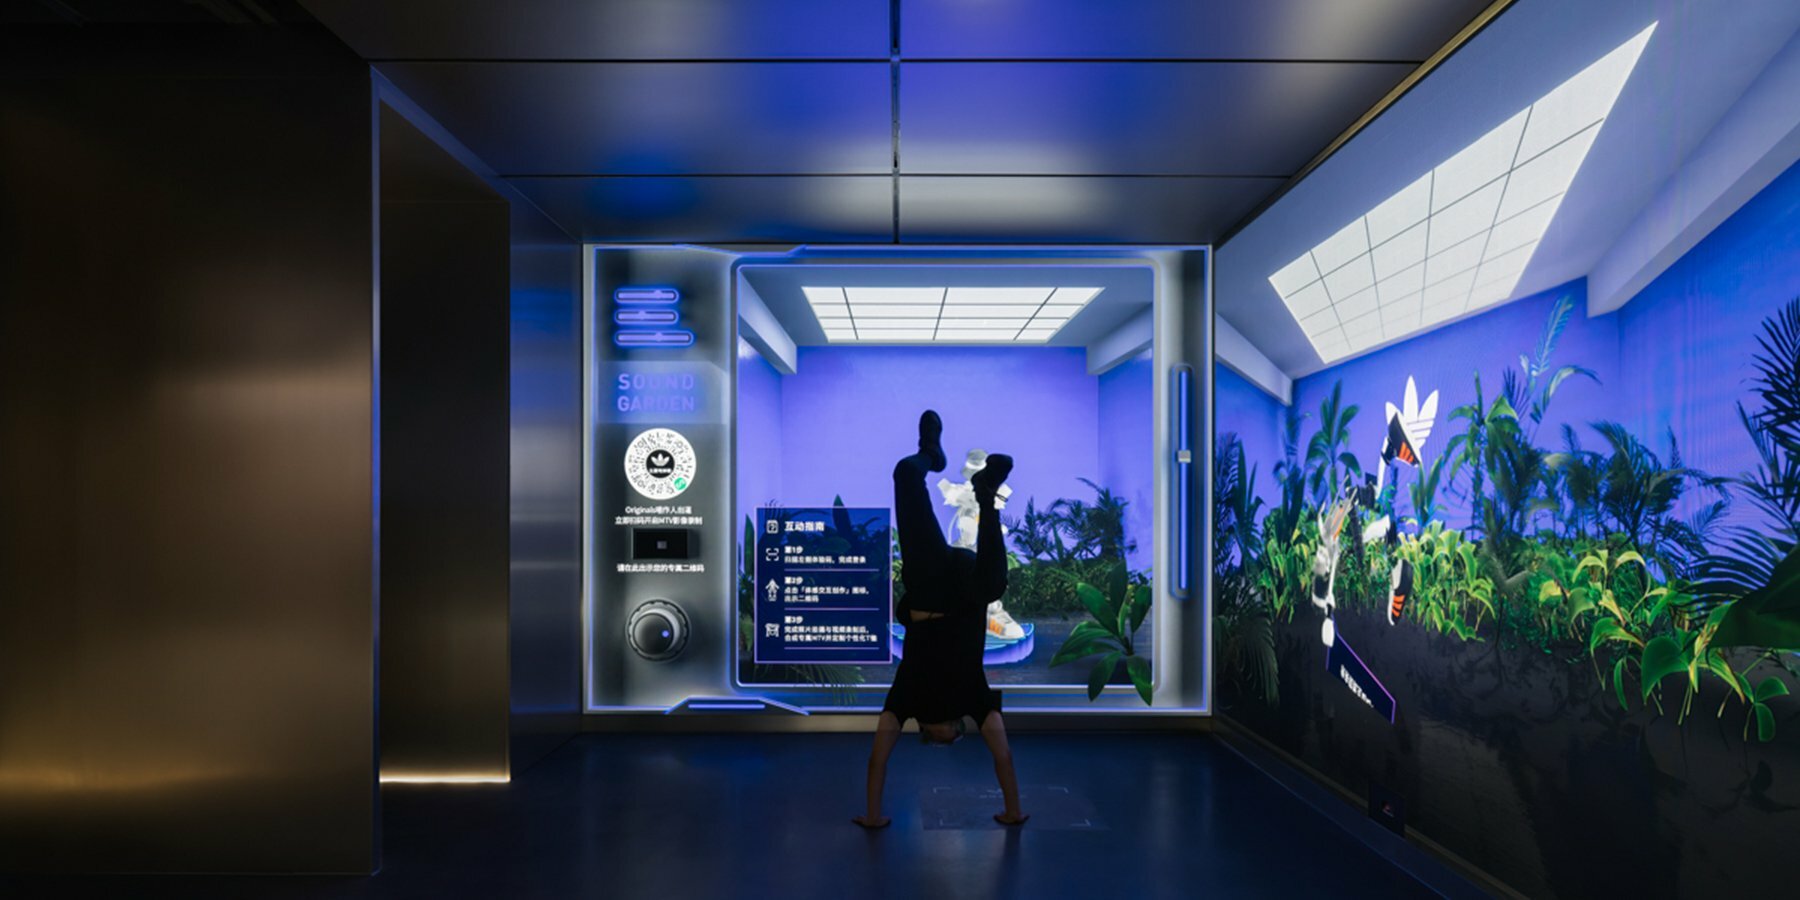 adidas beijing store immerses shoppers in 'phygital'